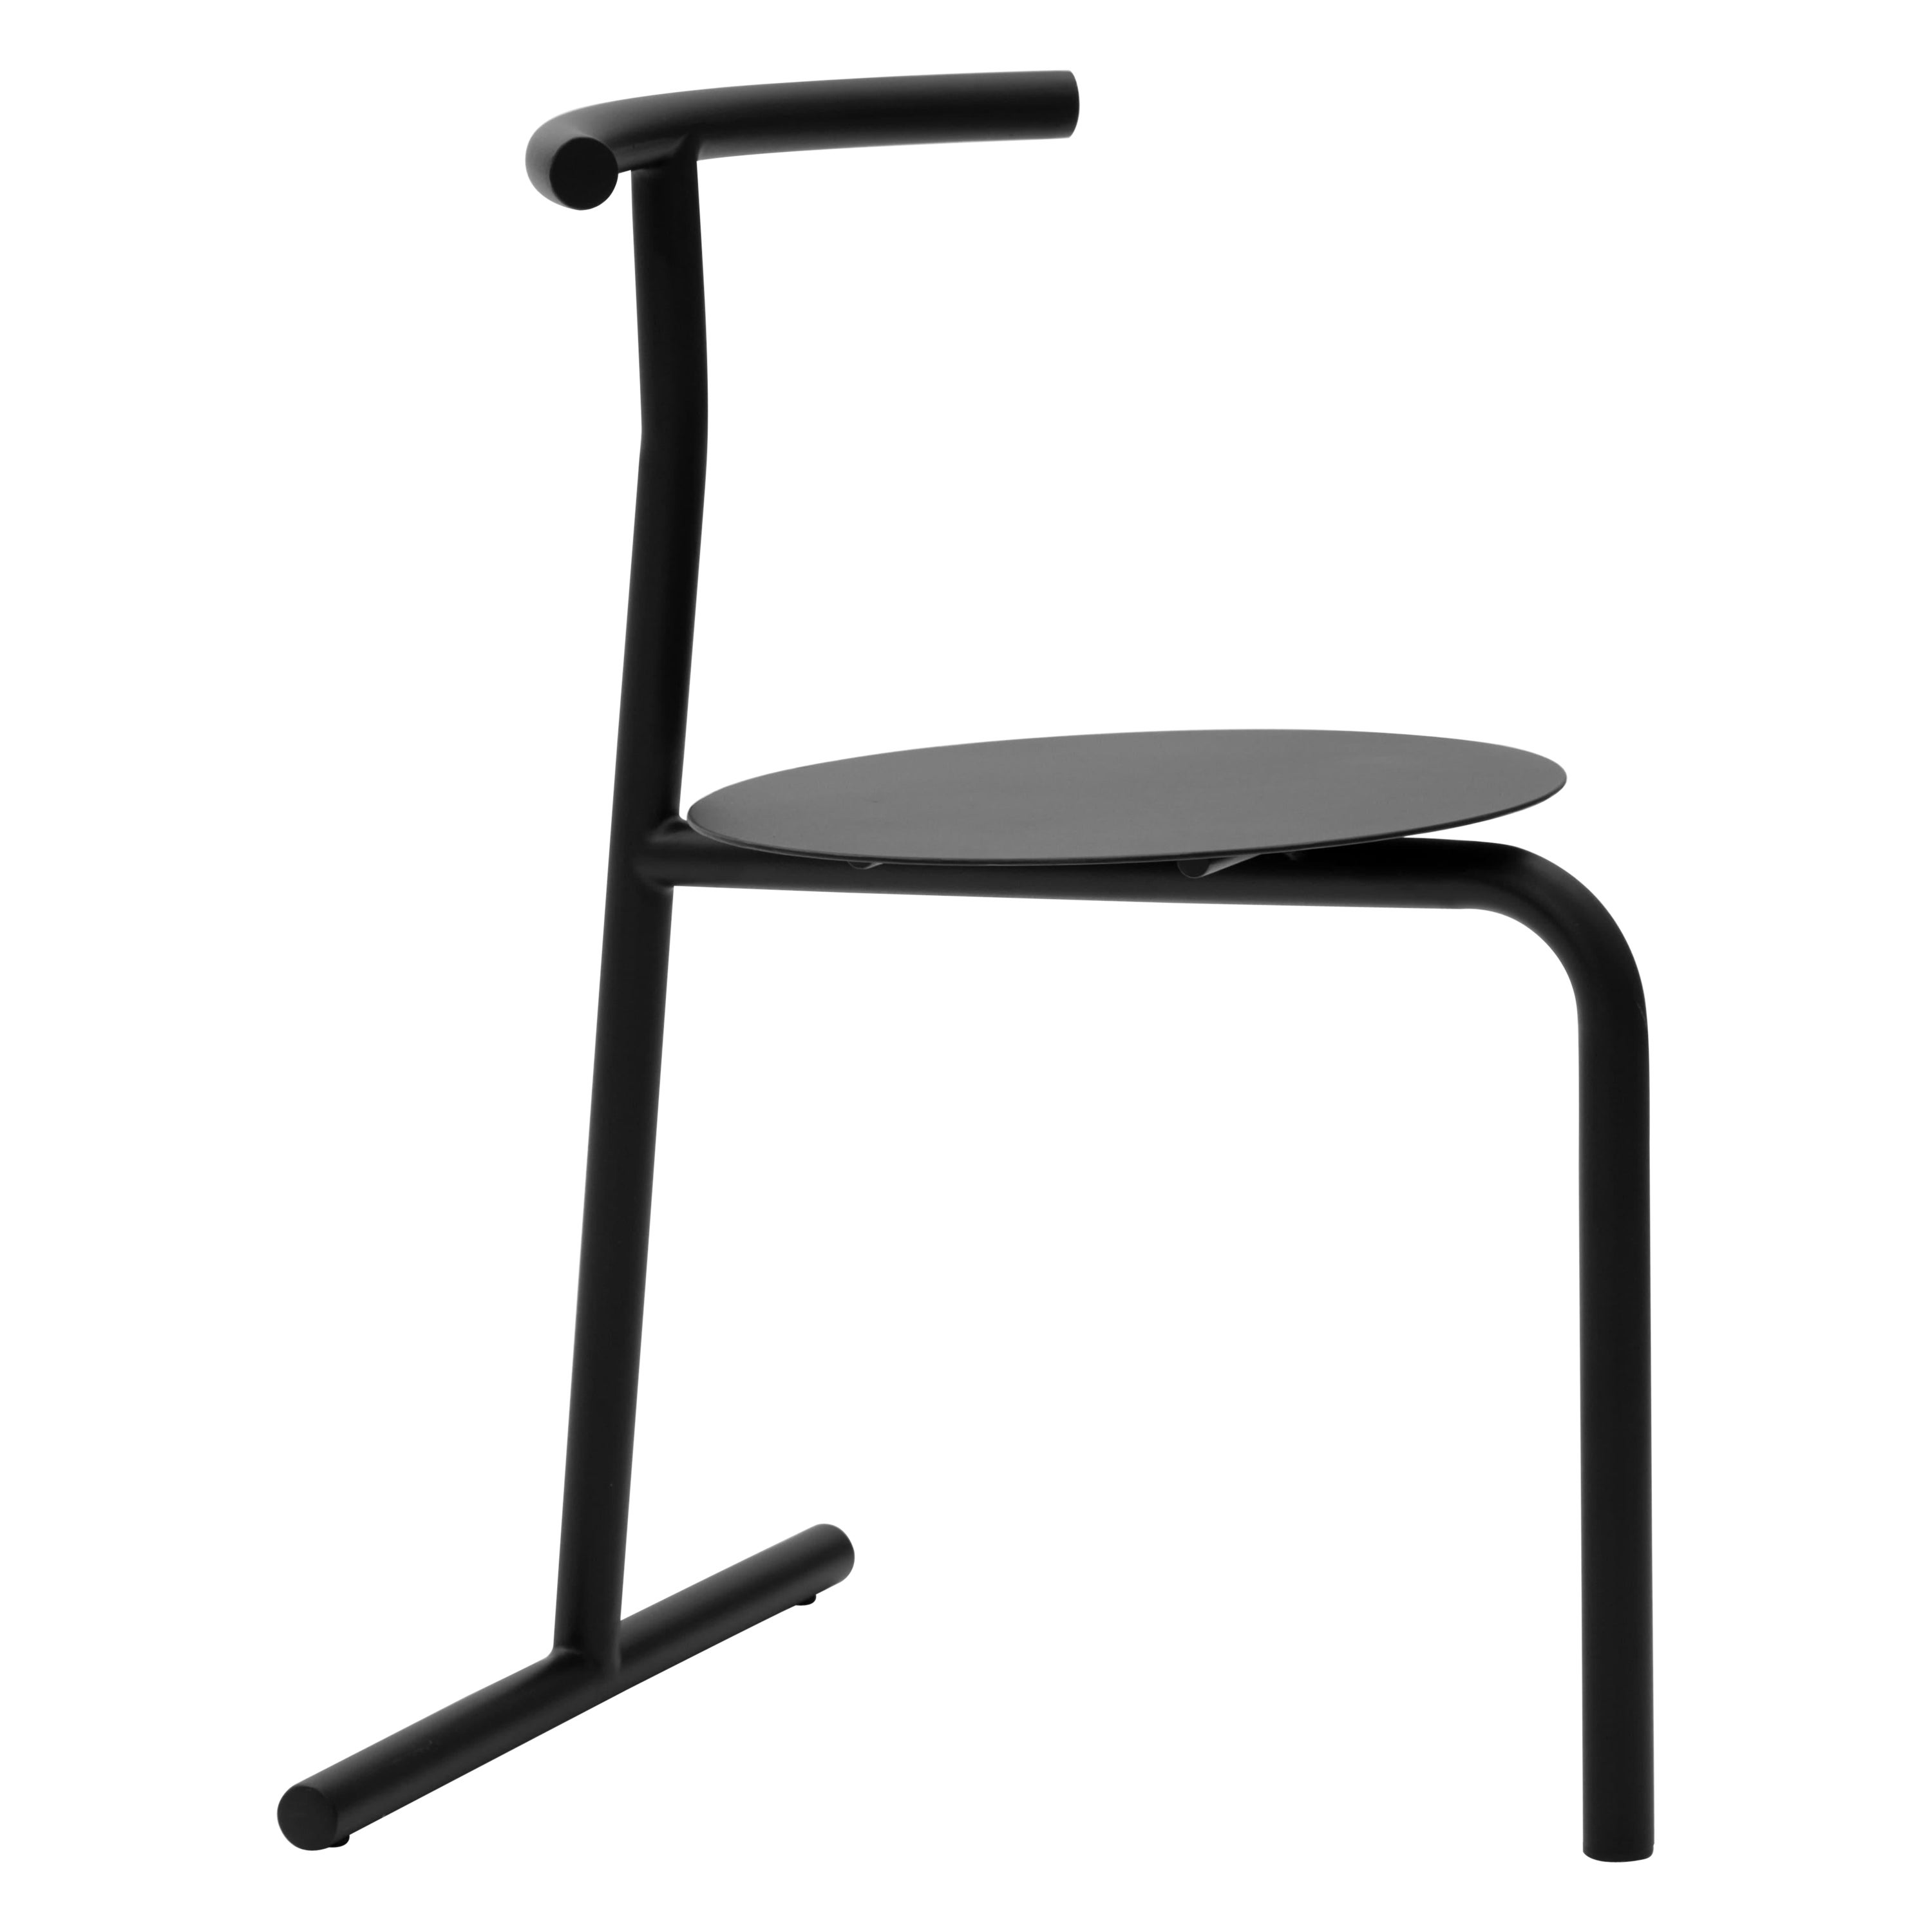 Eater Steel Seat Chair by Oito